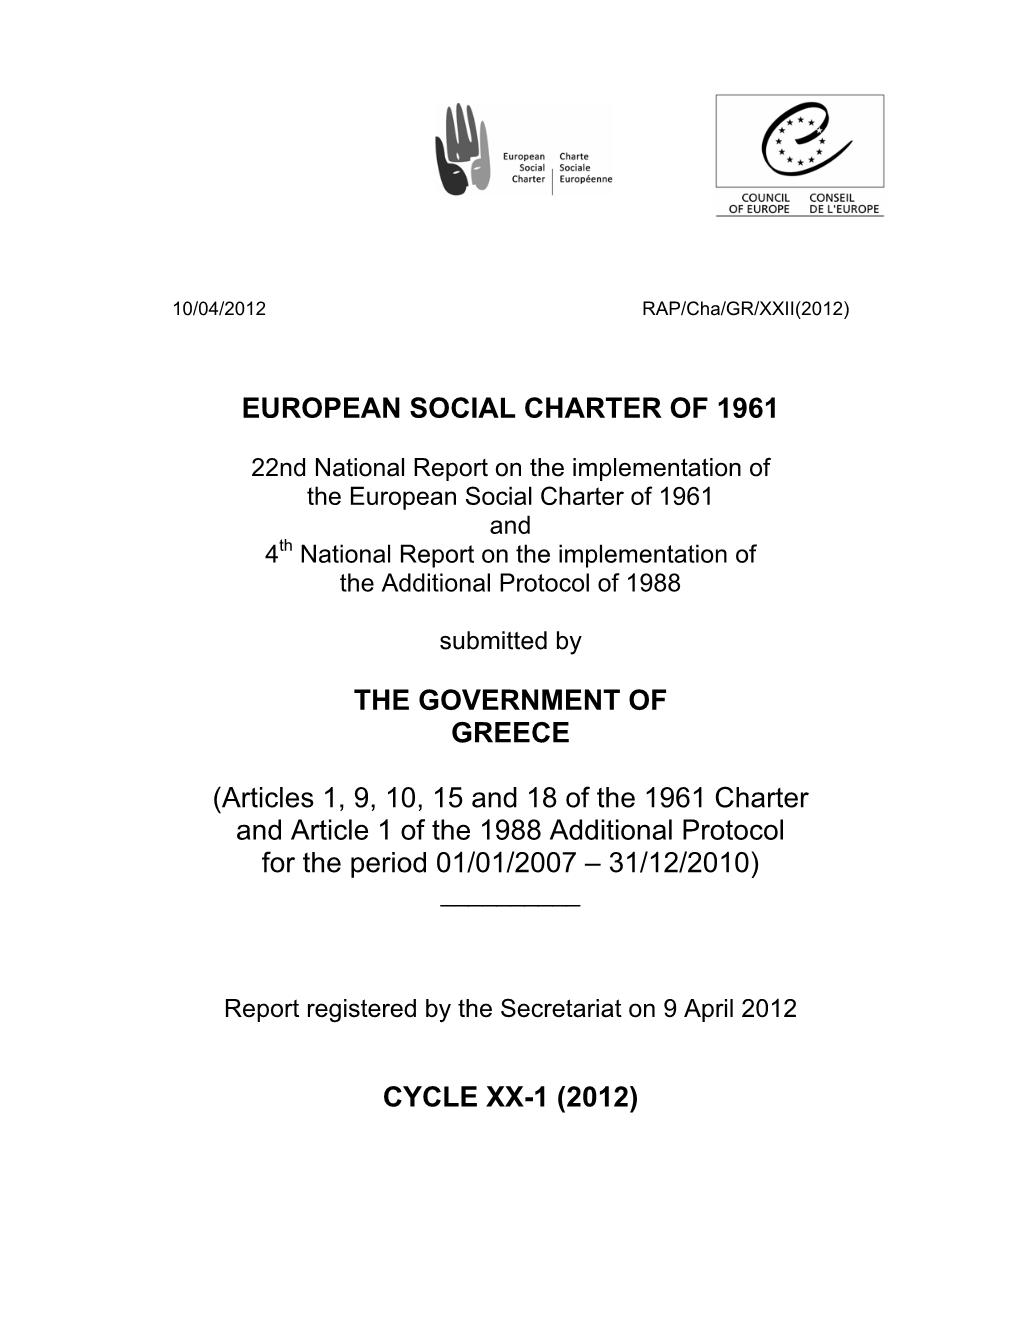 European Social Charter of 1961 the Government